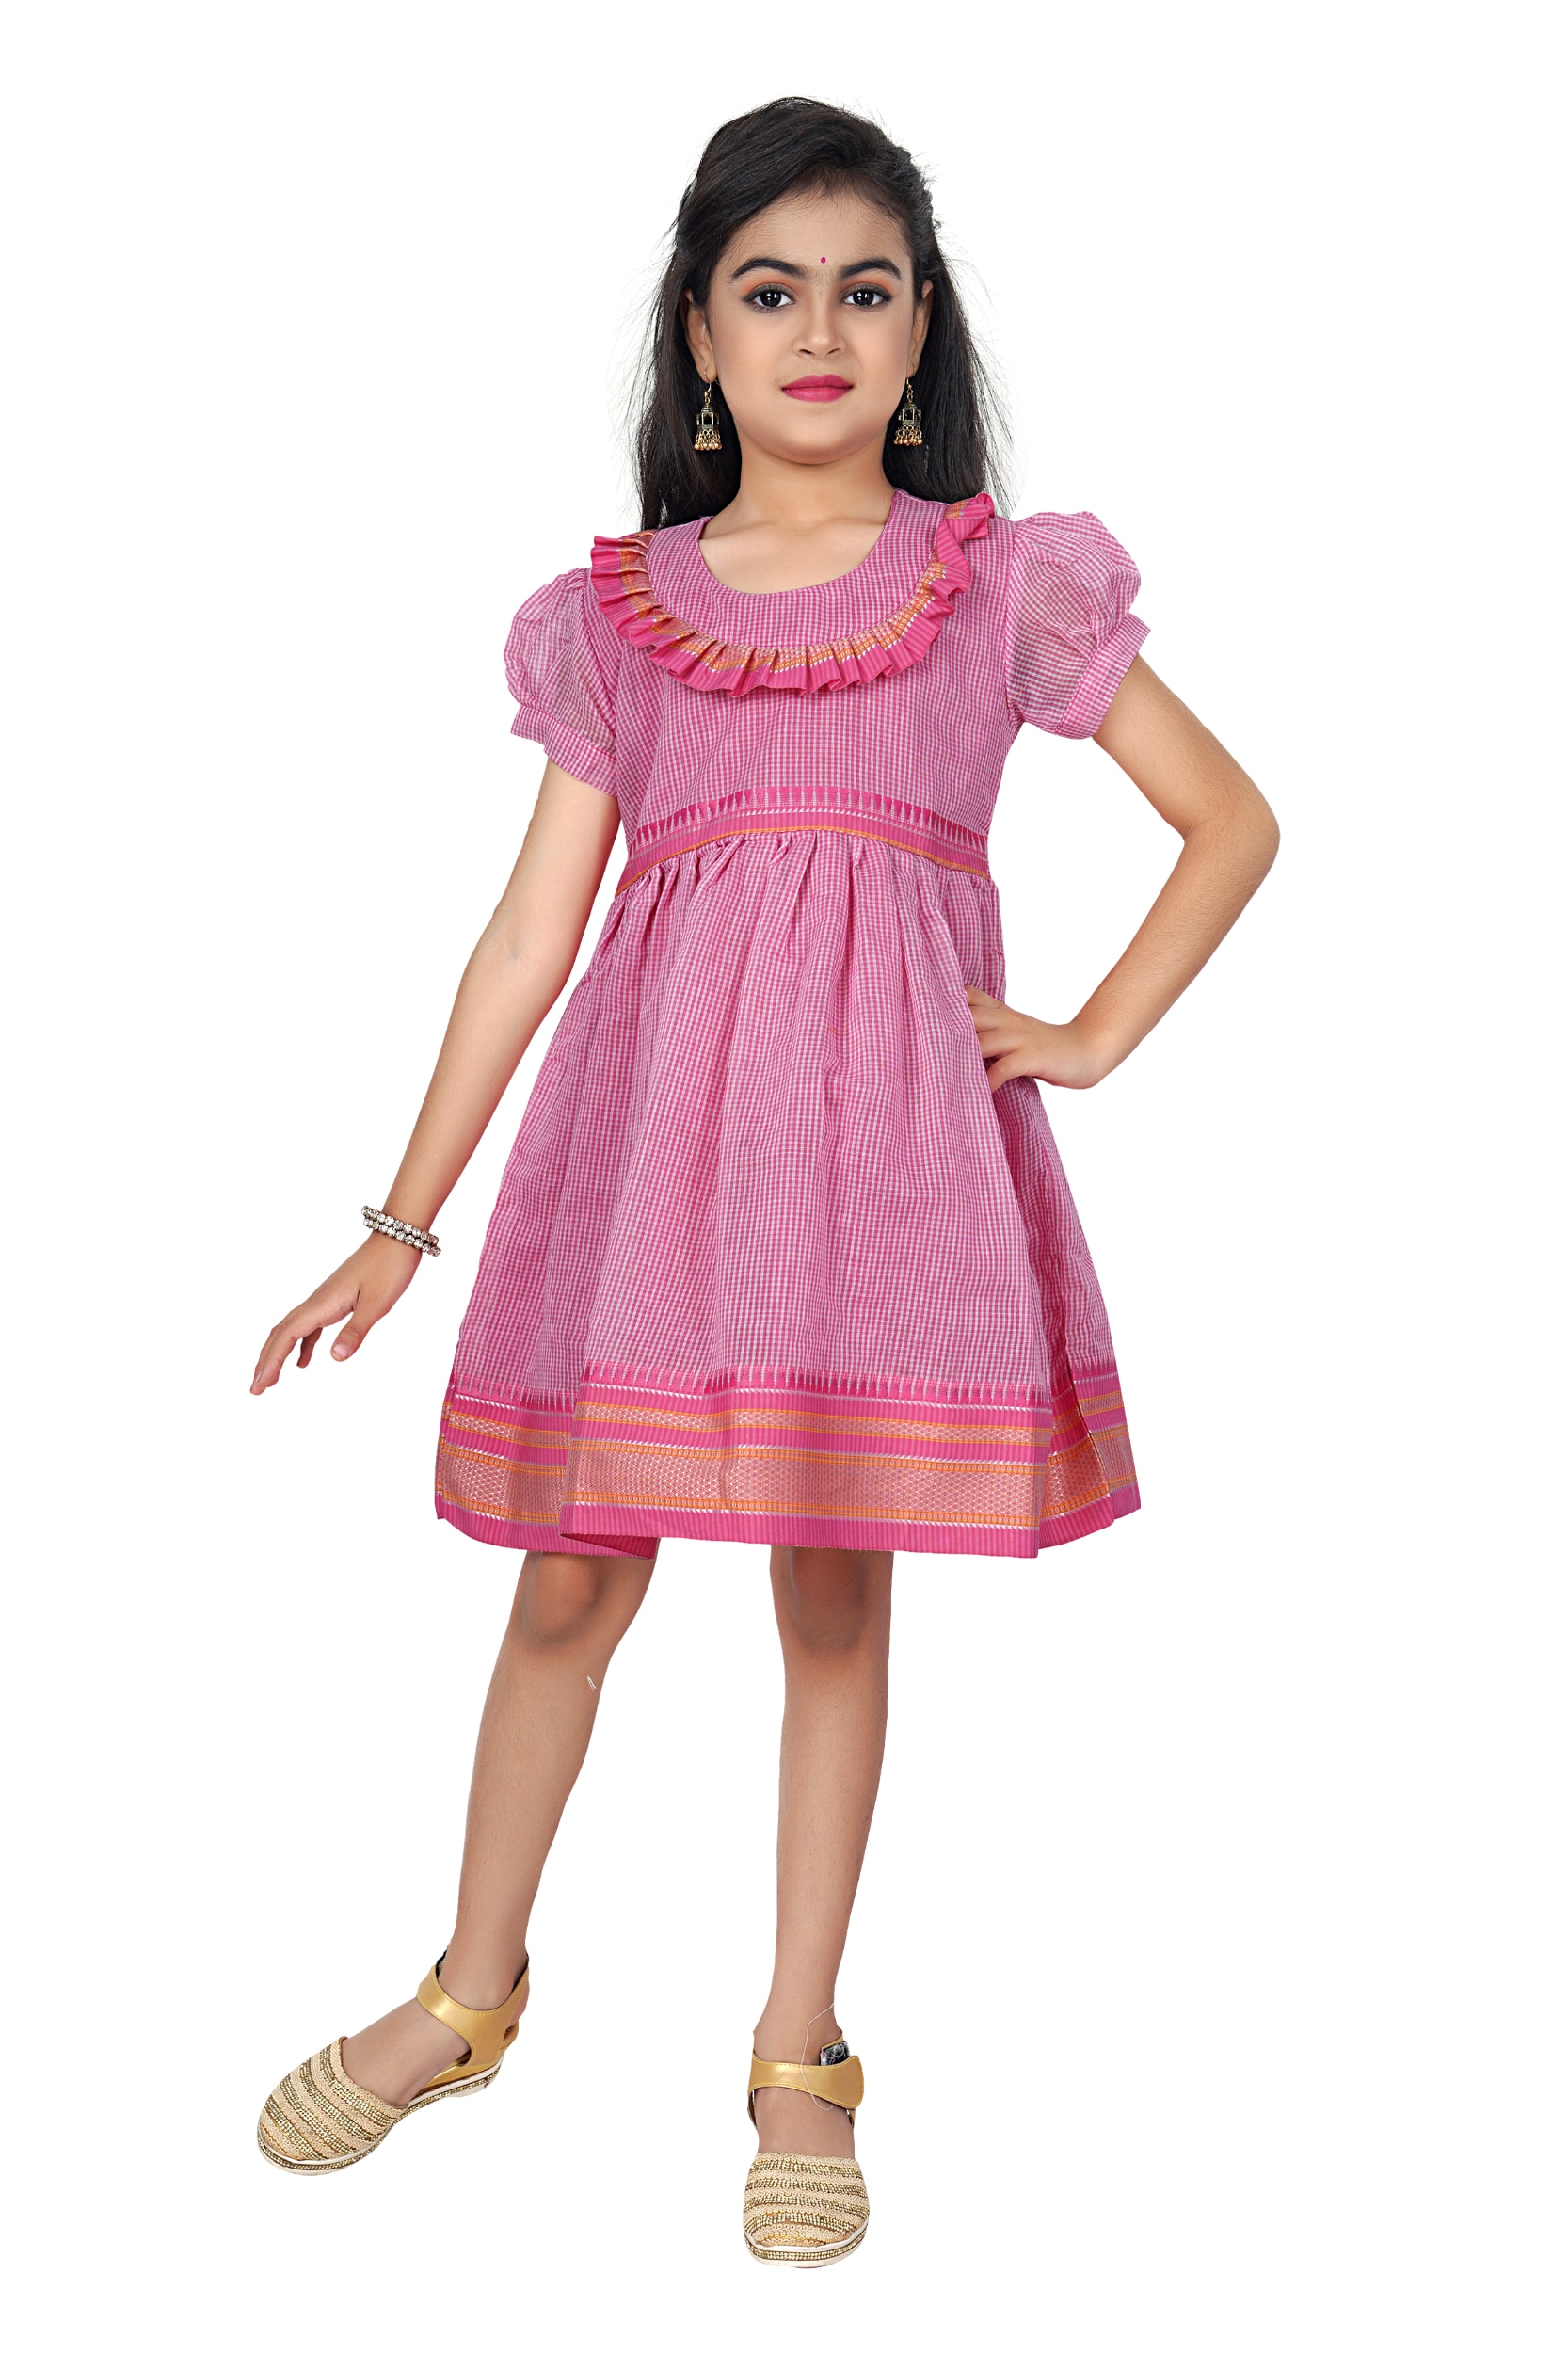 fcity.in - Frocks Dresses / Tinkle Stylus Frocks Dresses Umbrella Gown